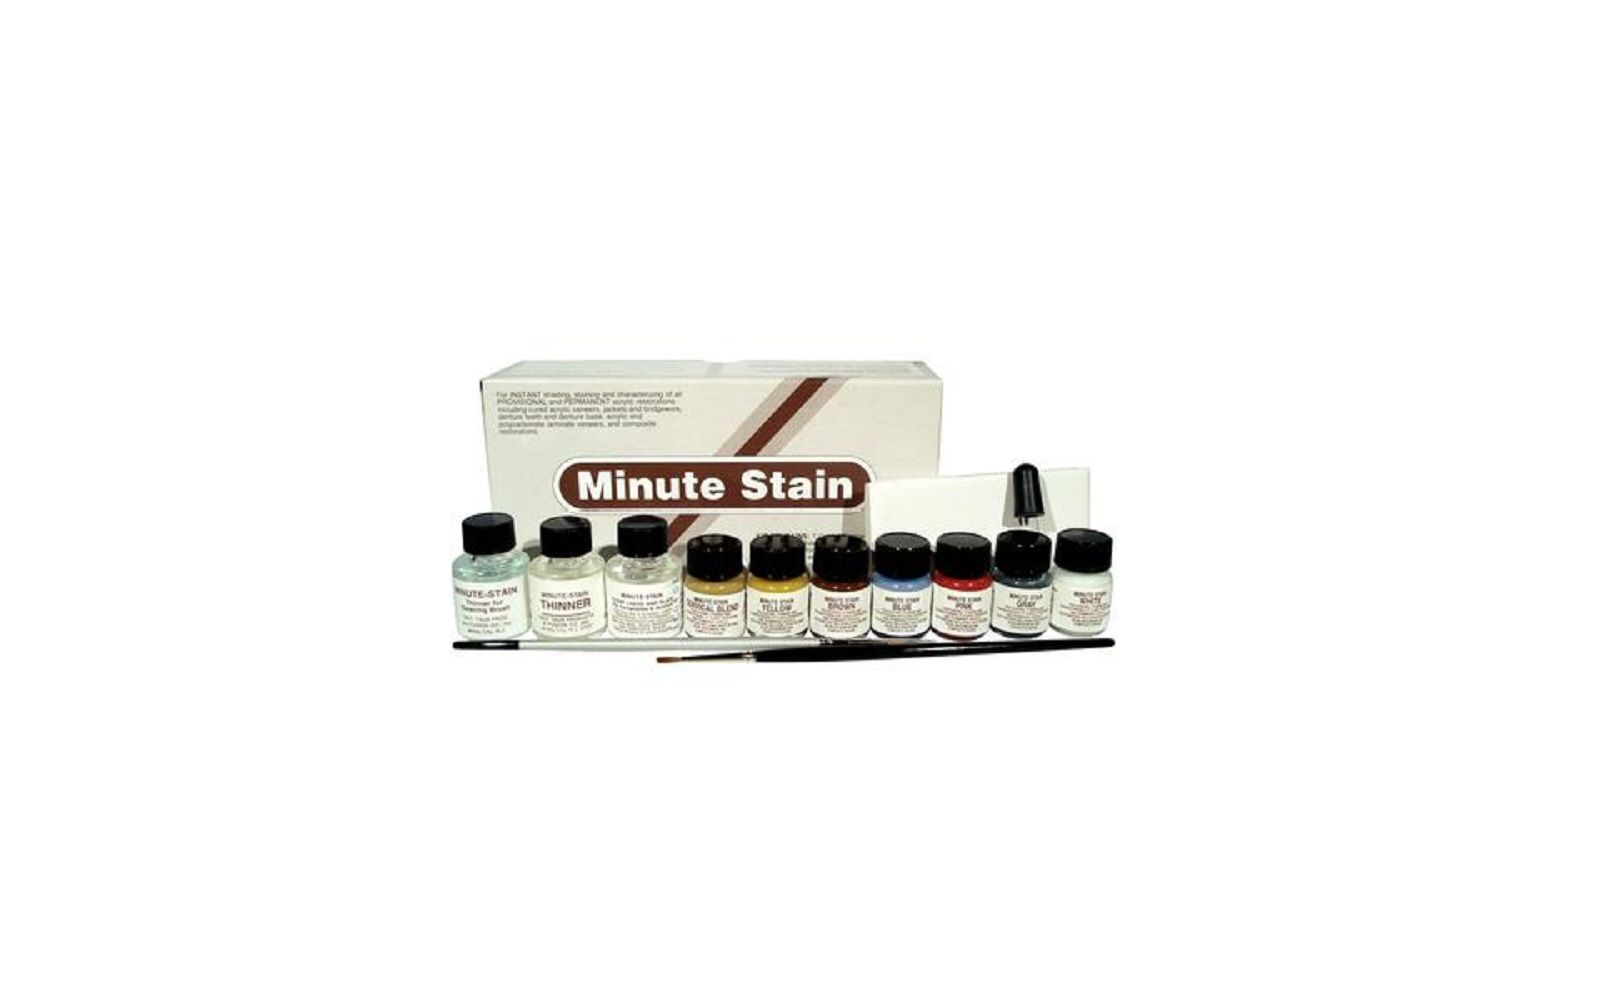 Minute stain 7 color kit